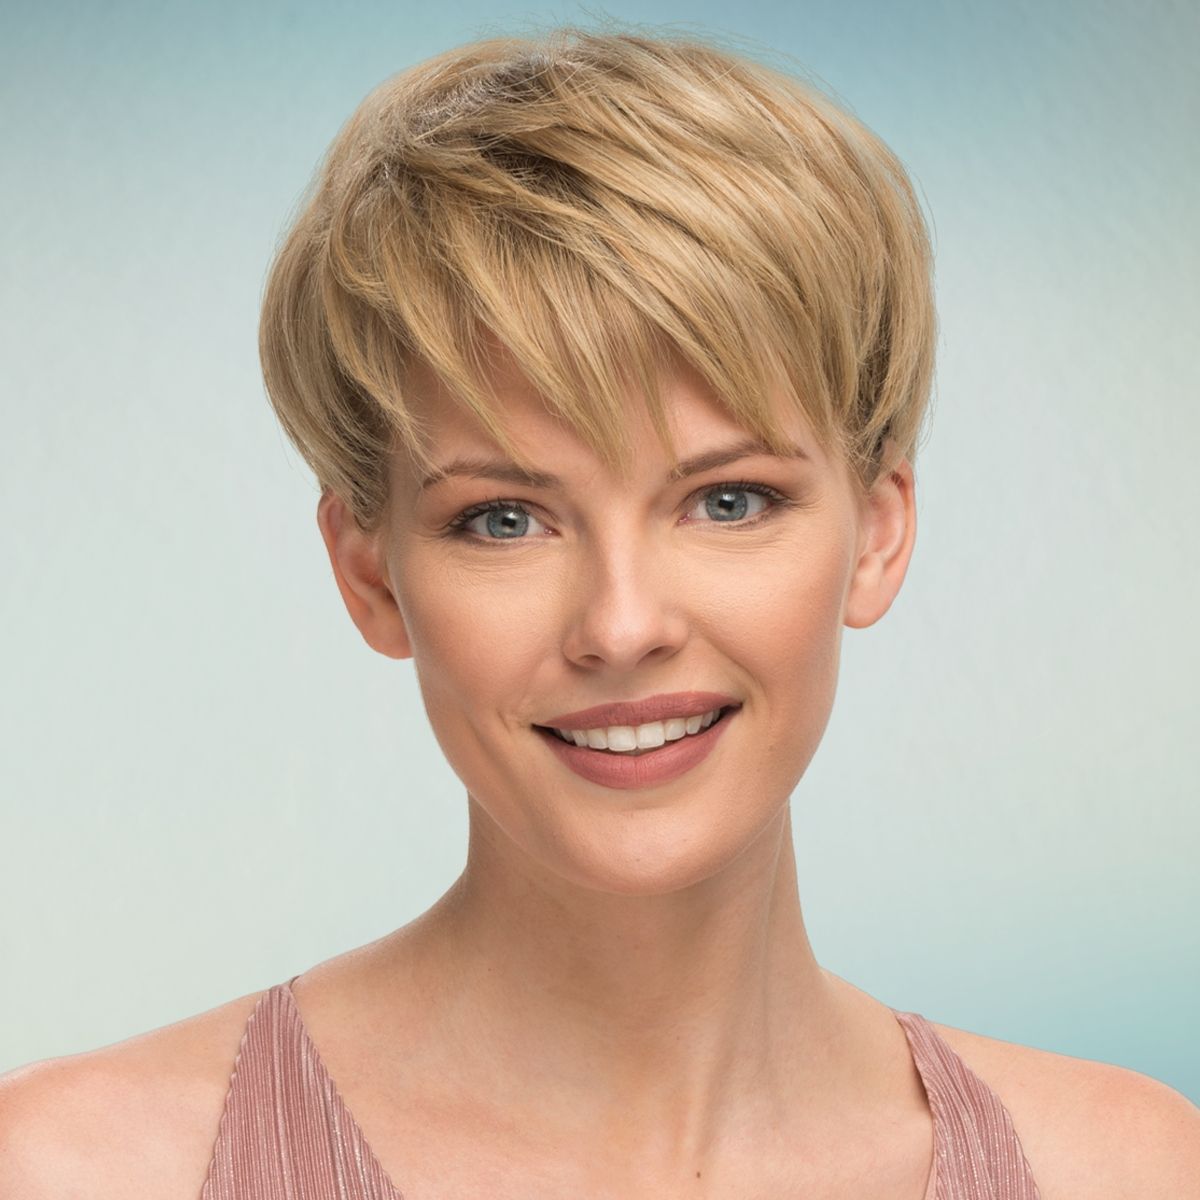 The Classic Pixie Haircut Is A Contemporary Hairstyle That's Short Throughout Most Up To Date Classic Pixie Haircuts (View 12 of 15)